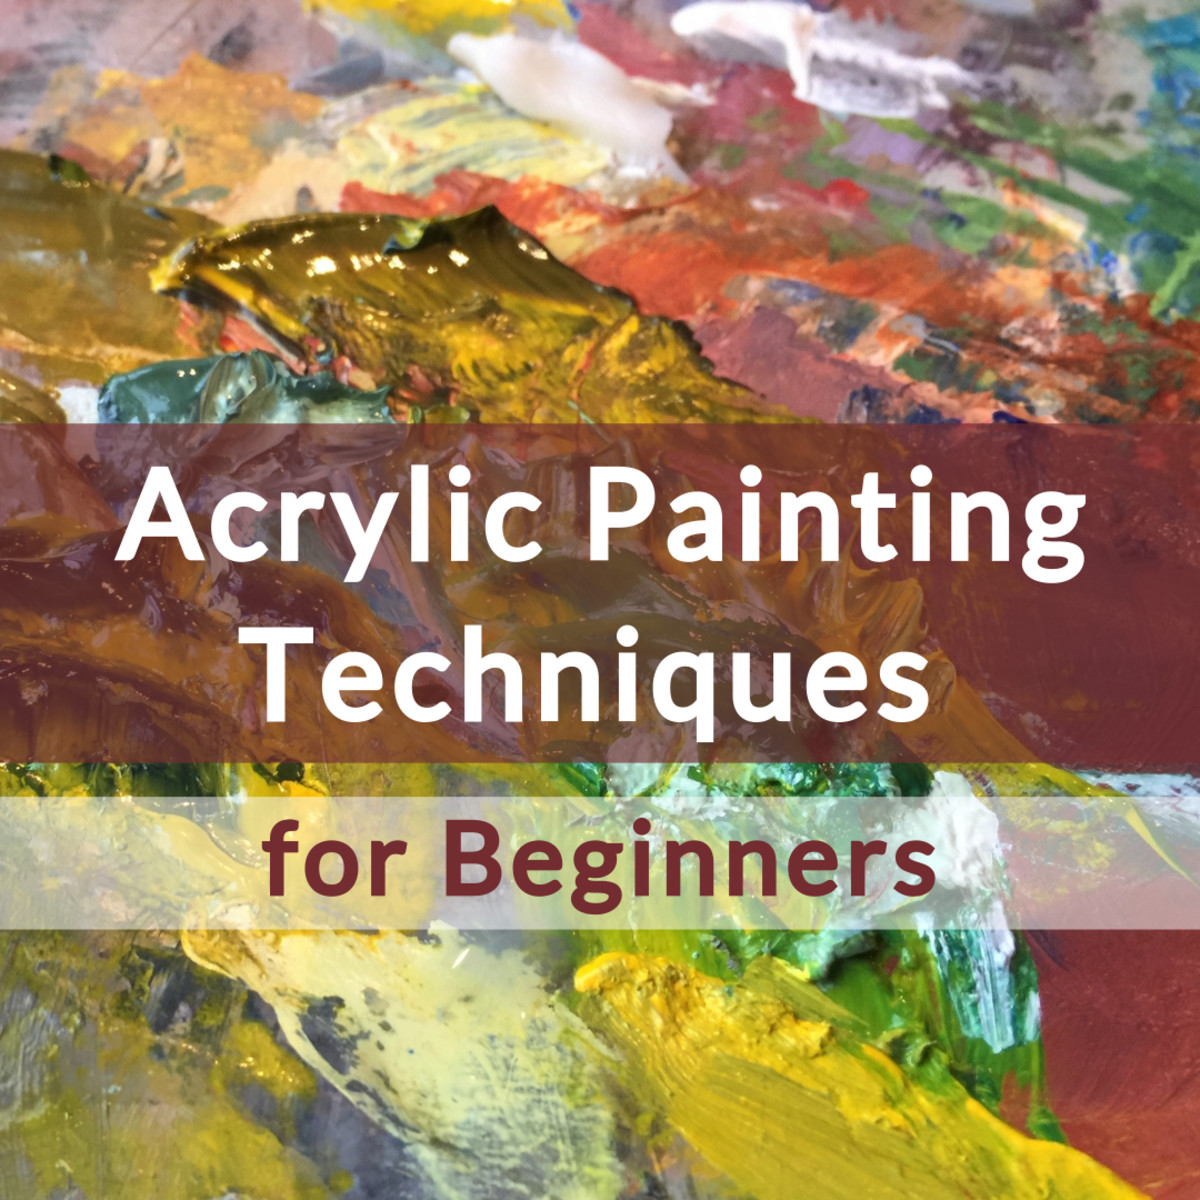 Acrylic paints  provide the opportunity to experiment both watercolor and oil painting techniques.  A review of the most popular acrylic painting techniques.